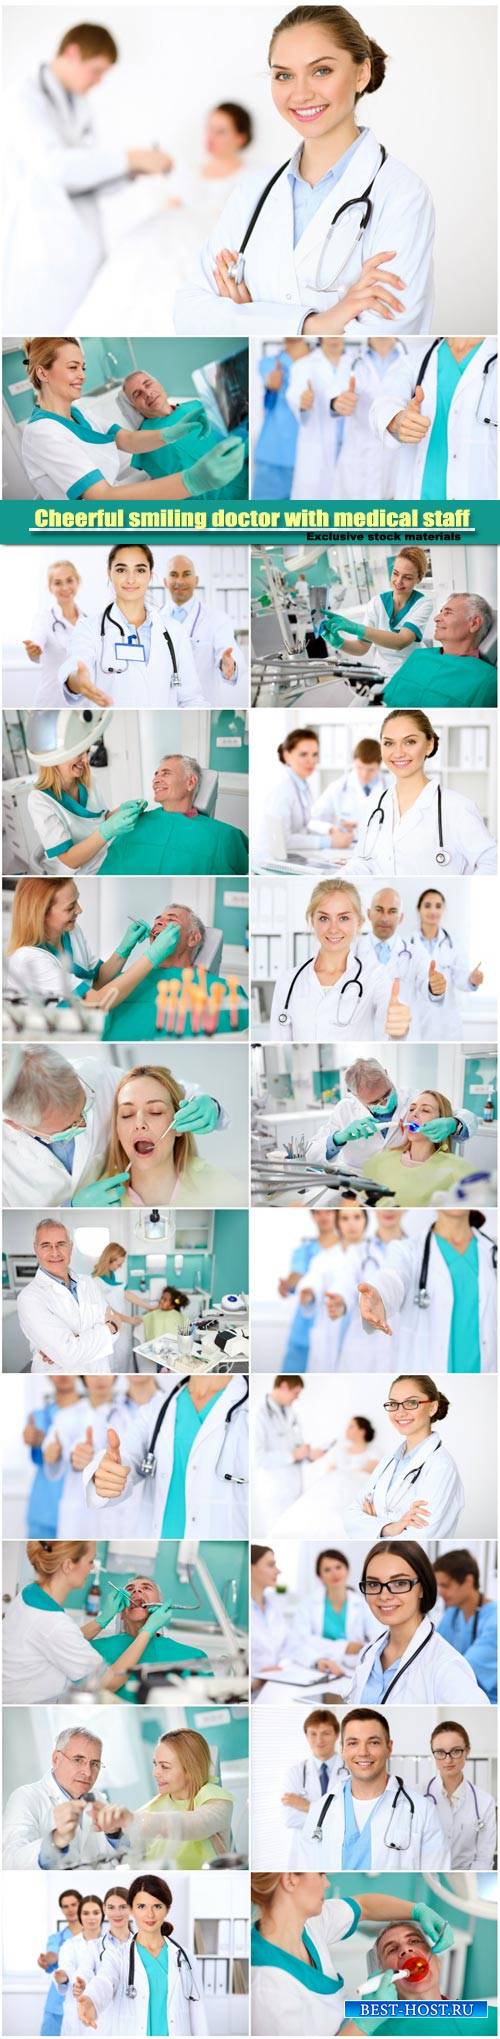 Cheerful smiling doctor with medical staff at the hospital, experienced den ...